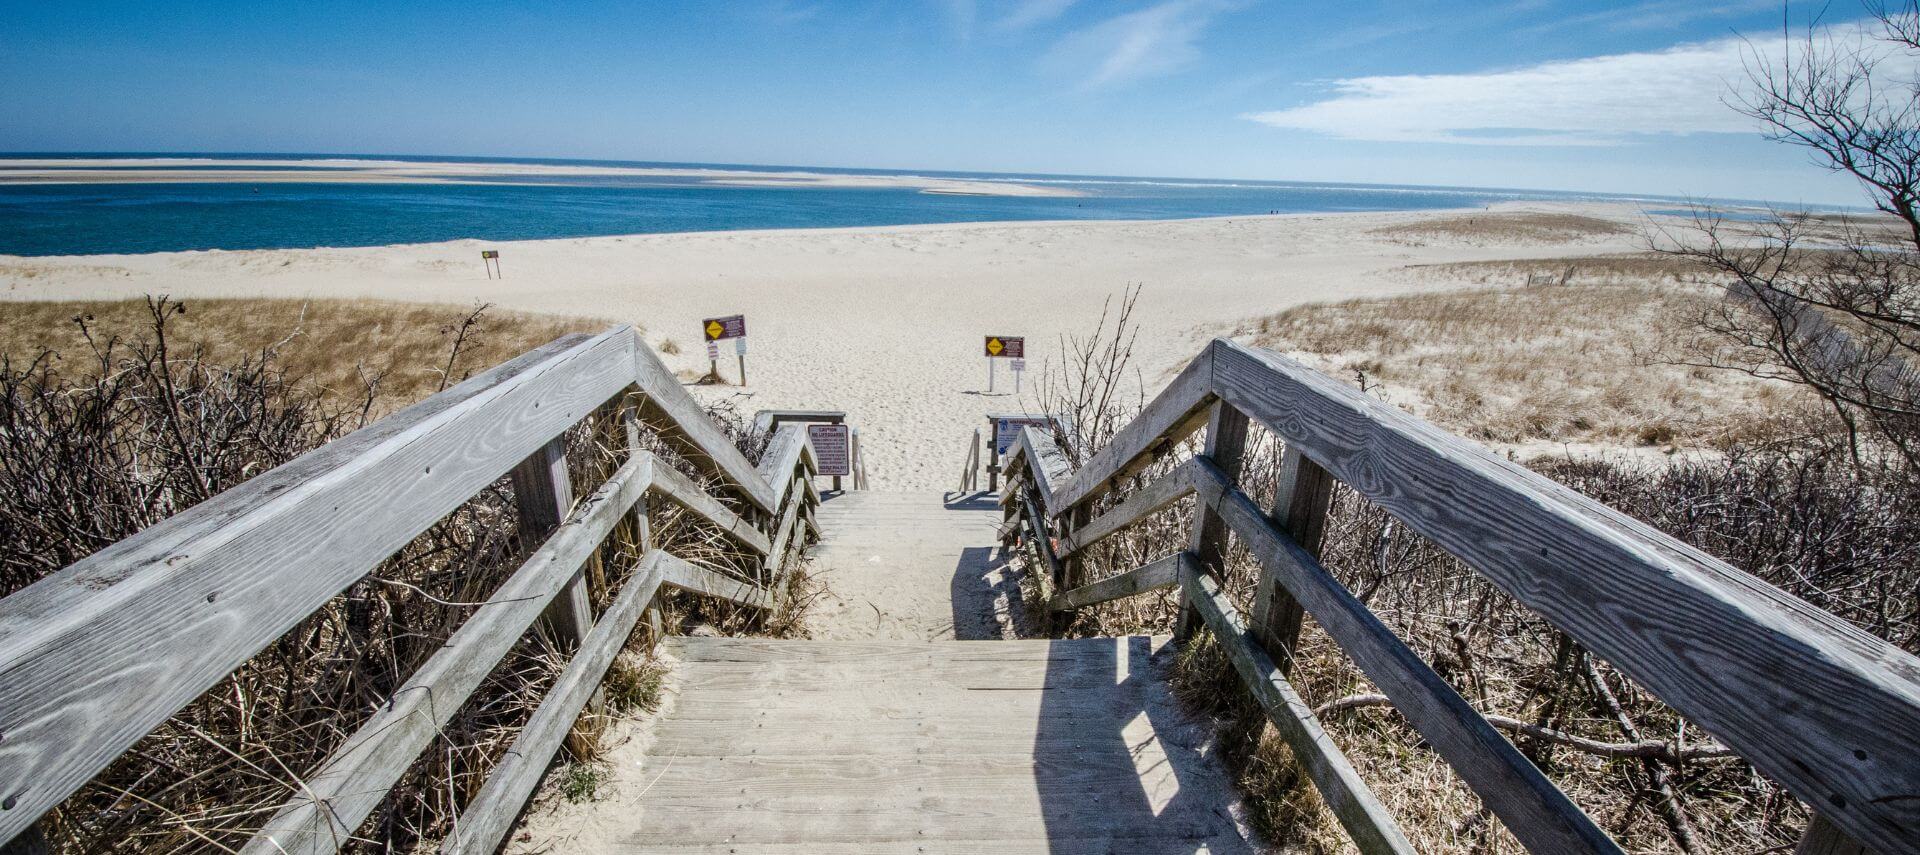 Wooden staircase leading down to the beach at Cape Cod National Seashore